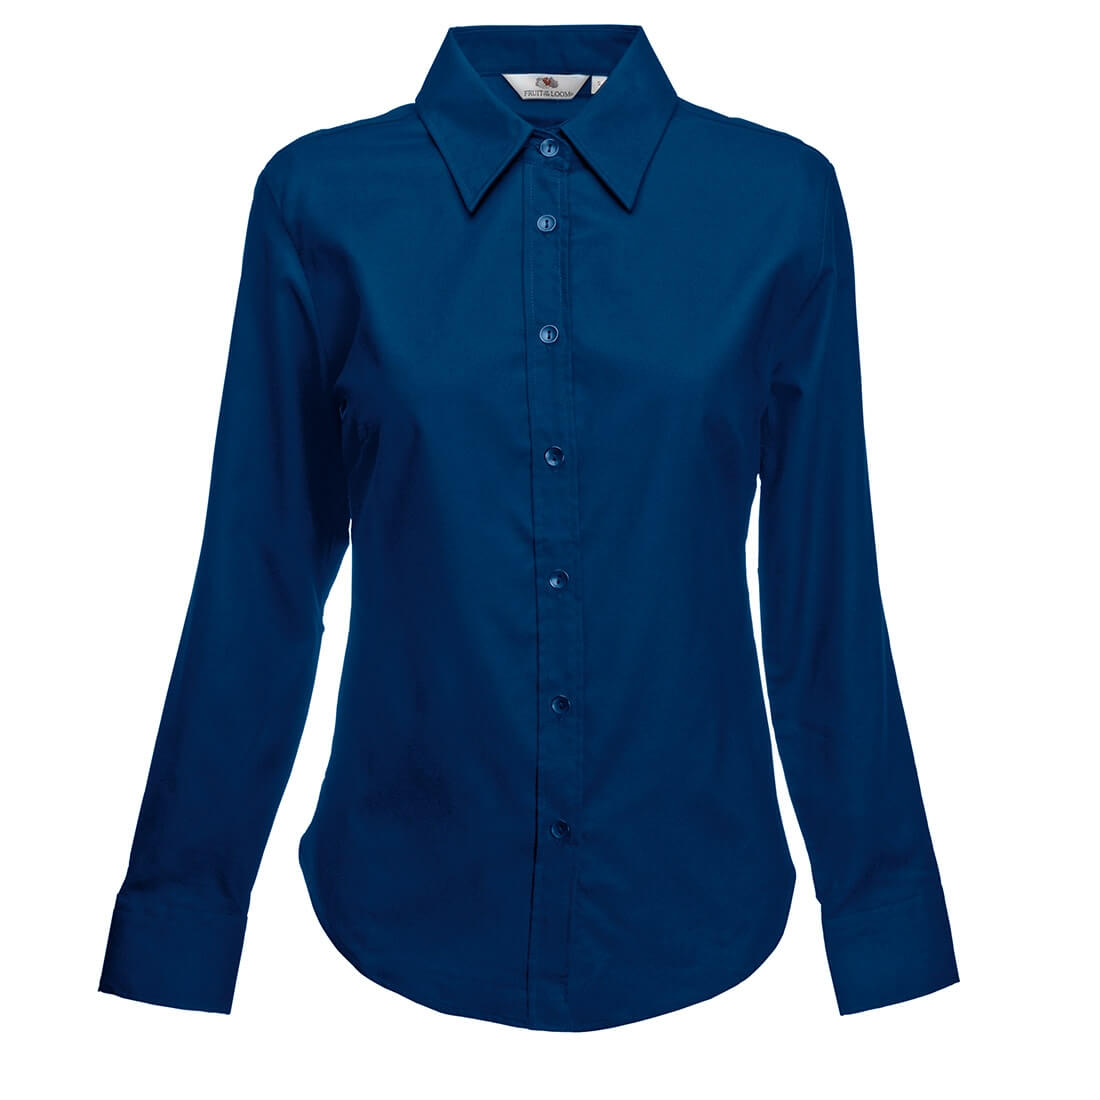 Lady-Fit Long Sleeve Oxford Shirt - Safetywear